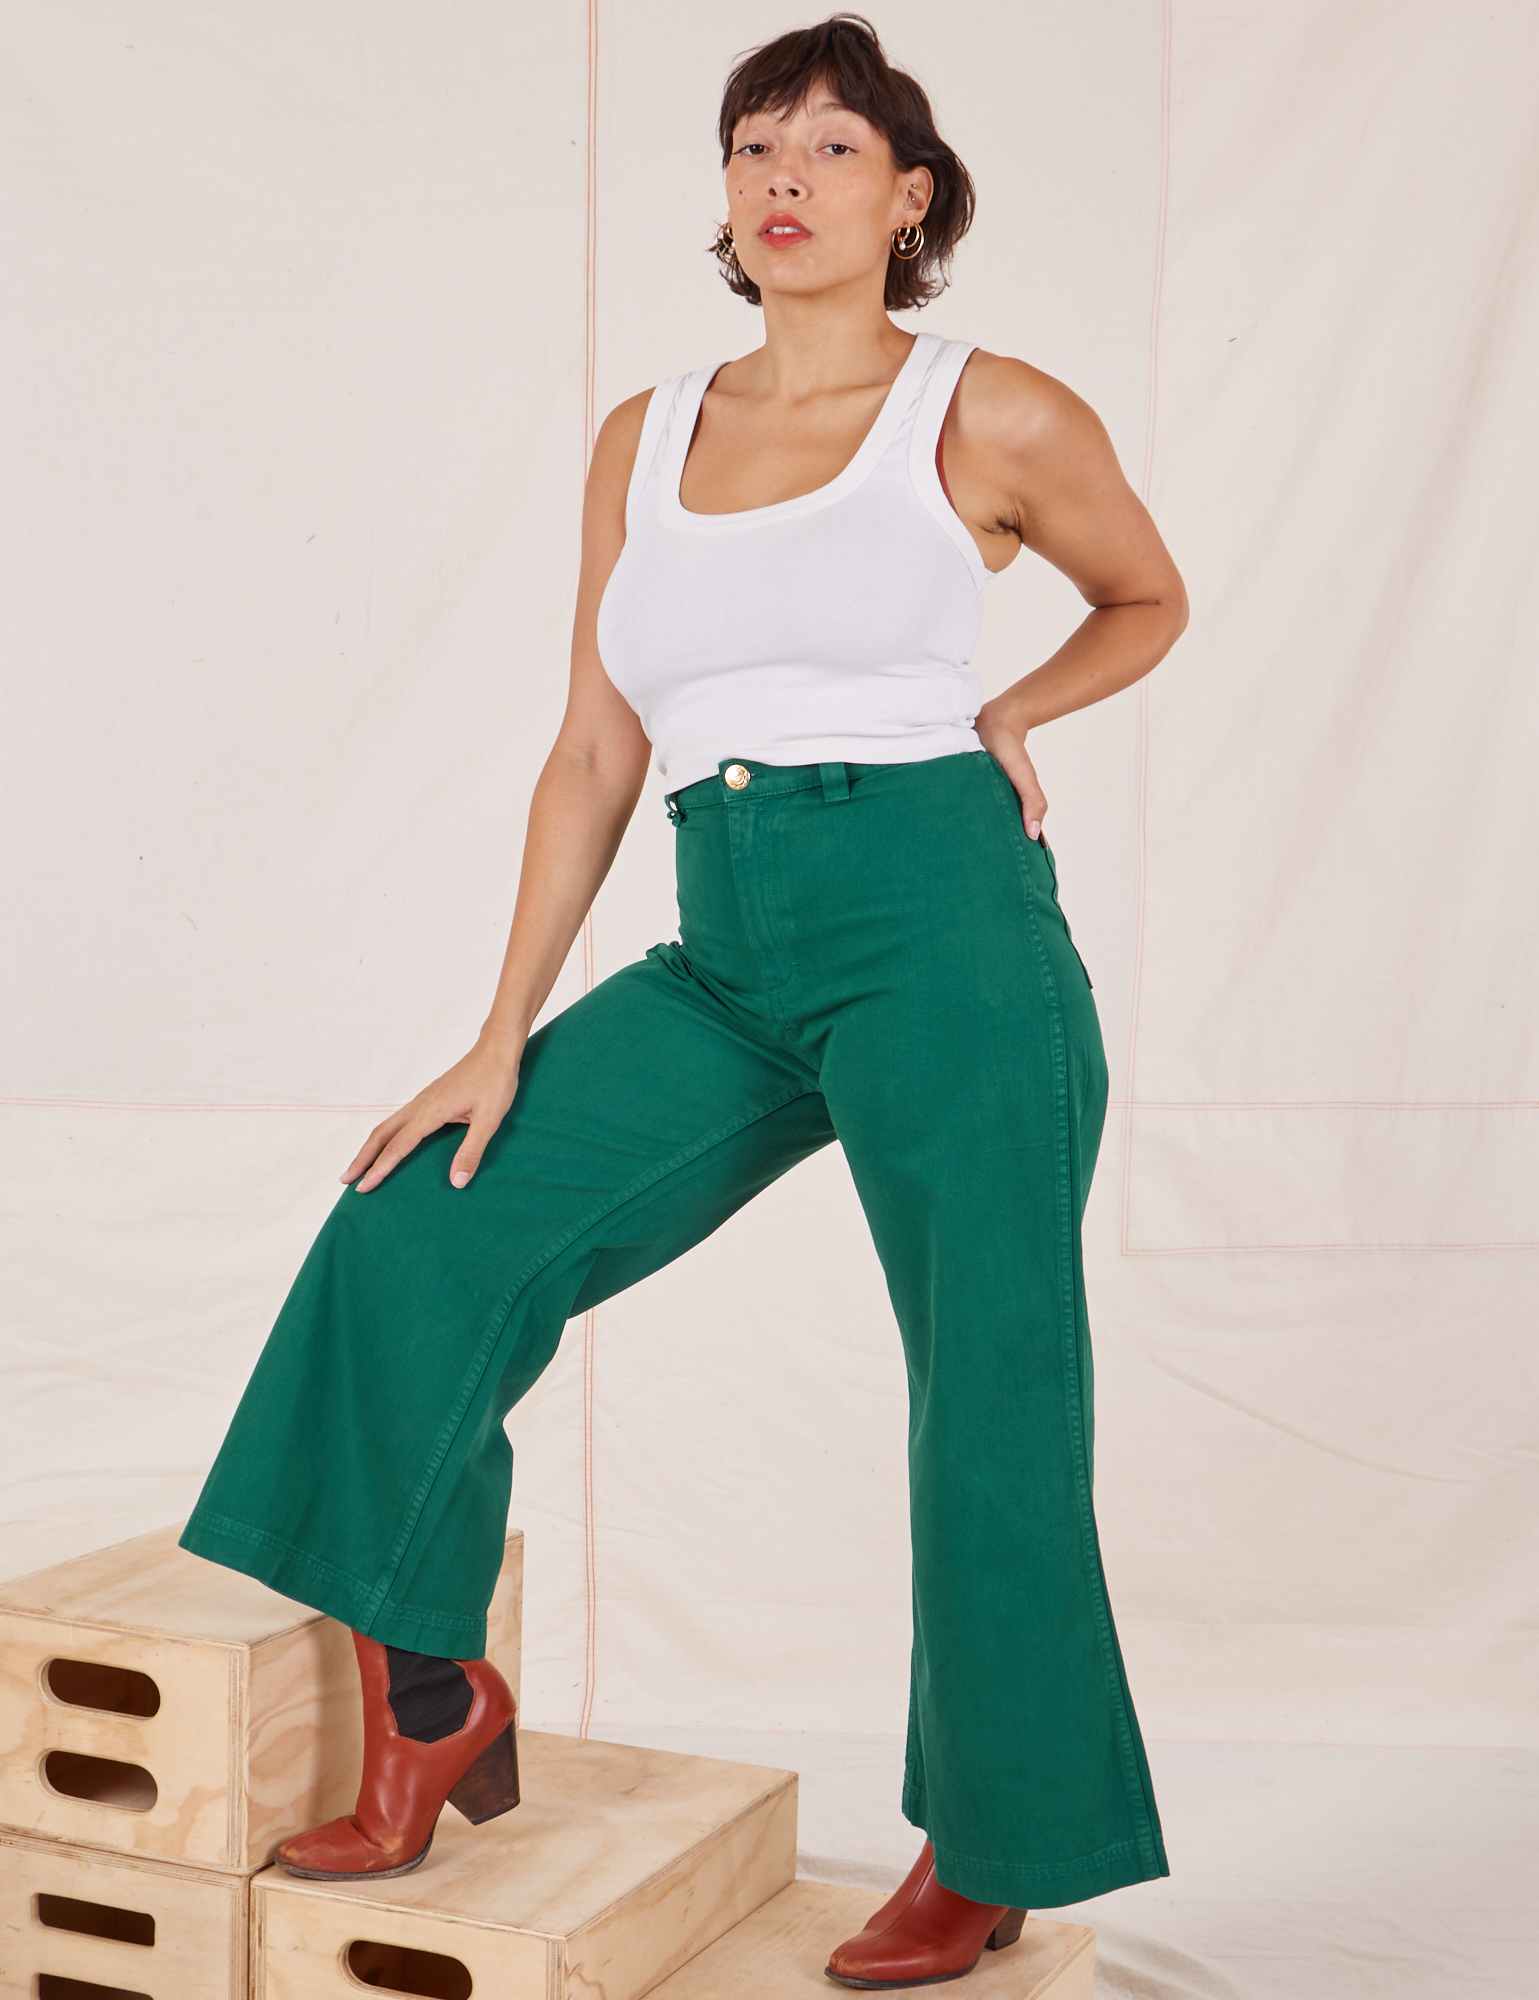 Tiara is wearing Bell Bottoms in Hunter Green and Tank Top vintage tee off-white